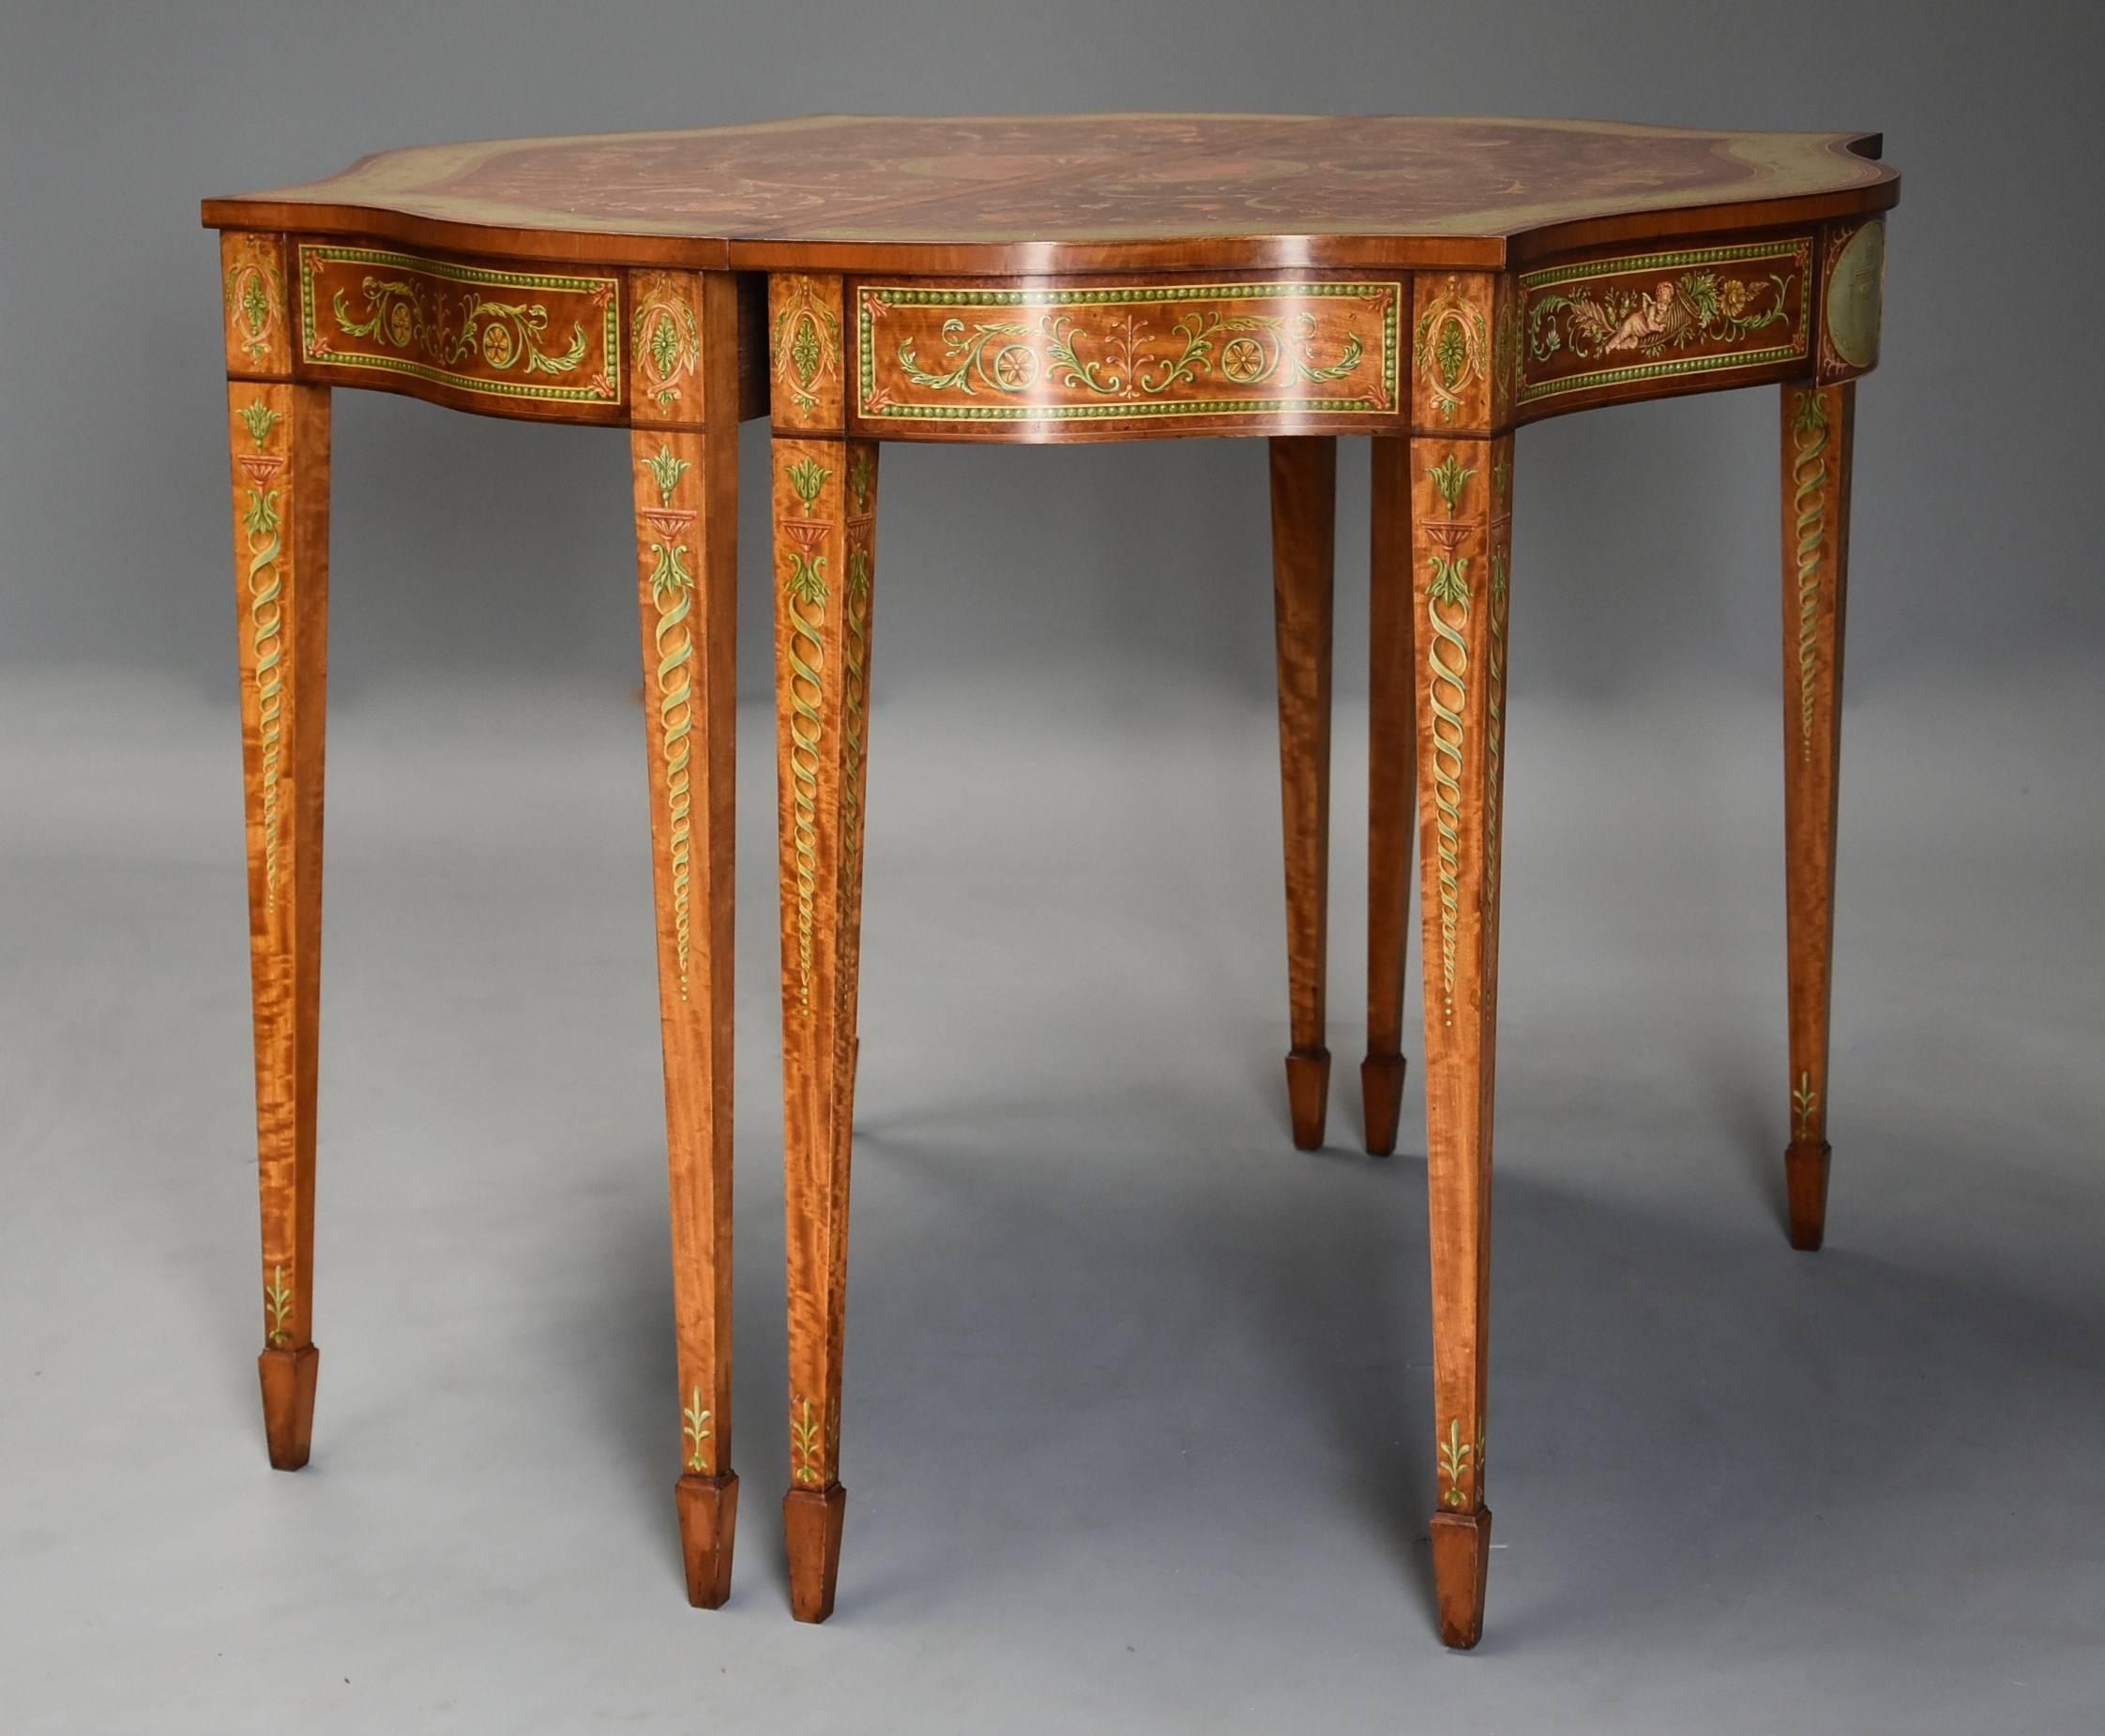 English Pair of Sheraton Revival Satinwood and Painted Serpentine Shaped Console Tables For Sale